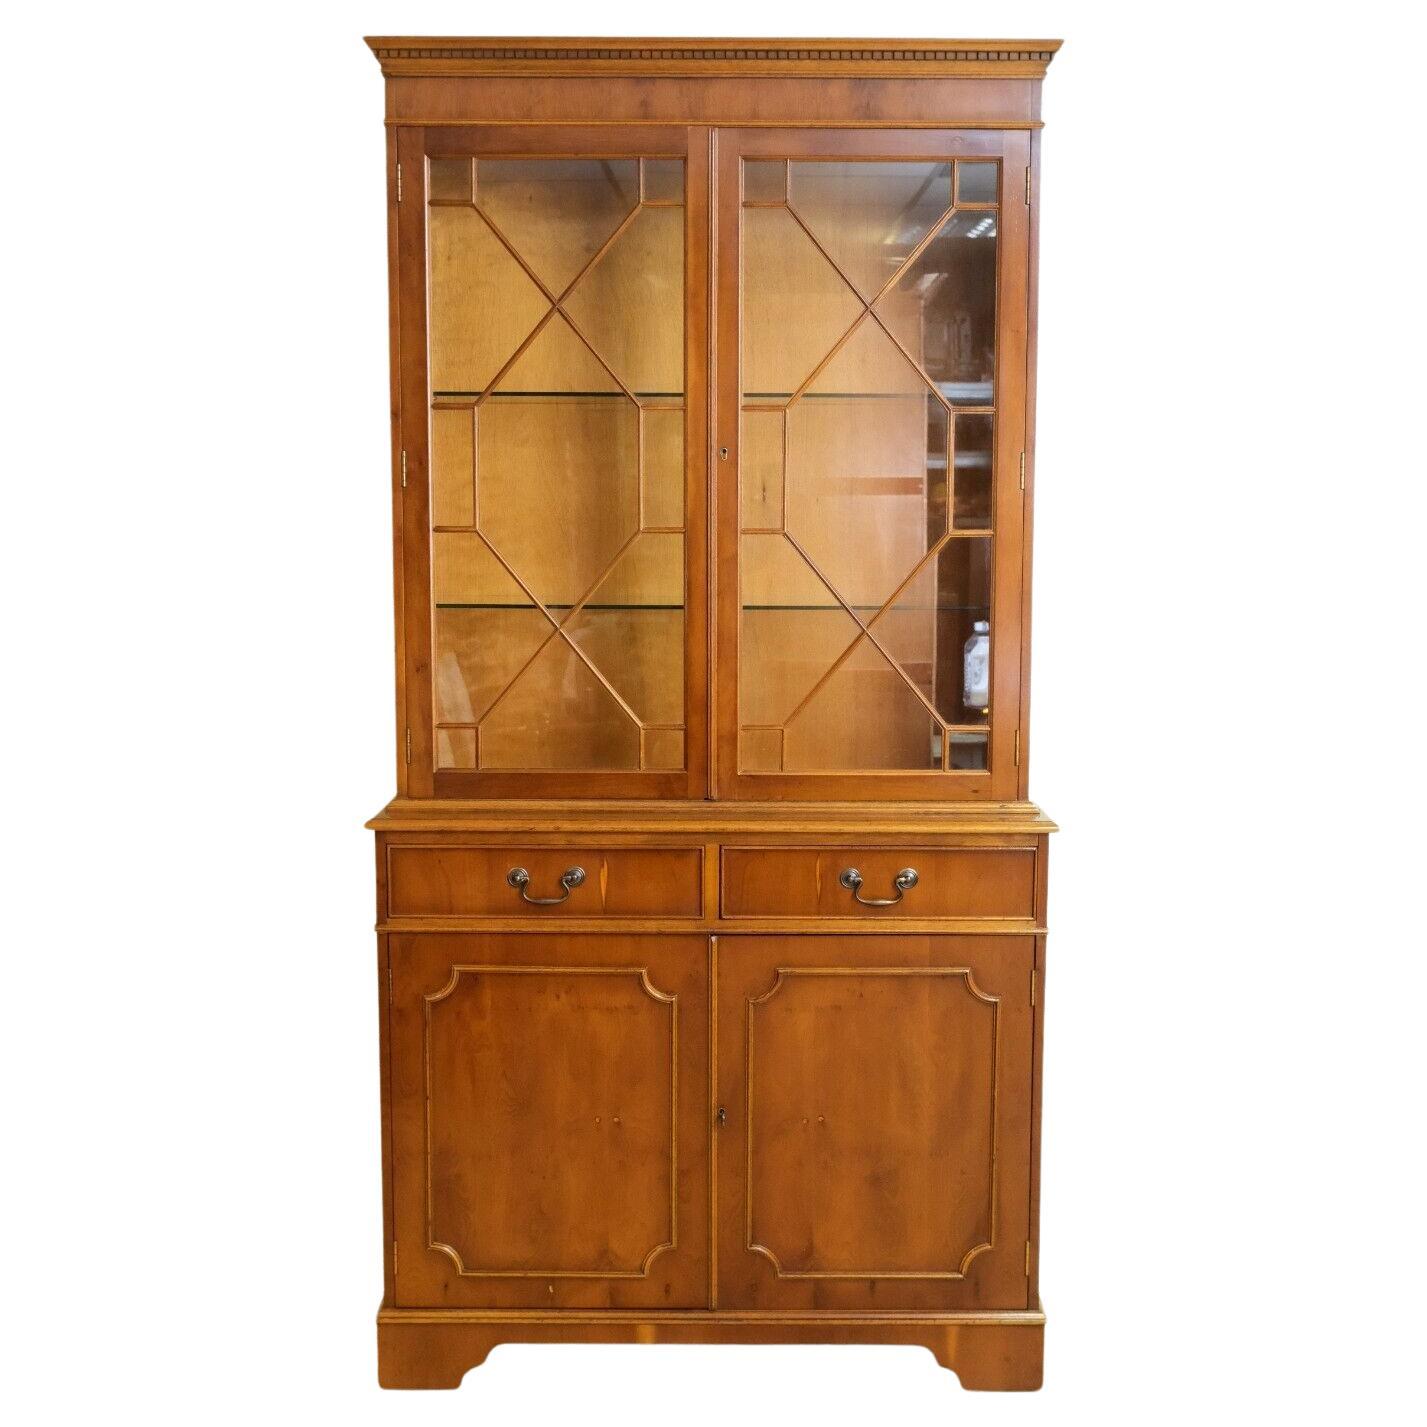 We are delighted to offer for sale this lovely Yew wood display/bookcase cabinet with lights and adjustable glass shelves. 

This well made display/bookcase cabinet has adjustable glass and a pair of glassed top front doors. The bottom part shows